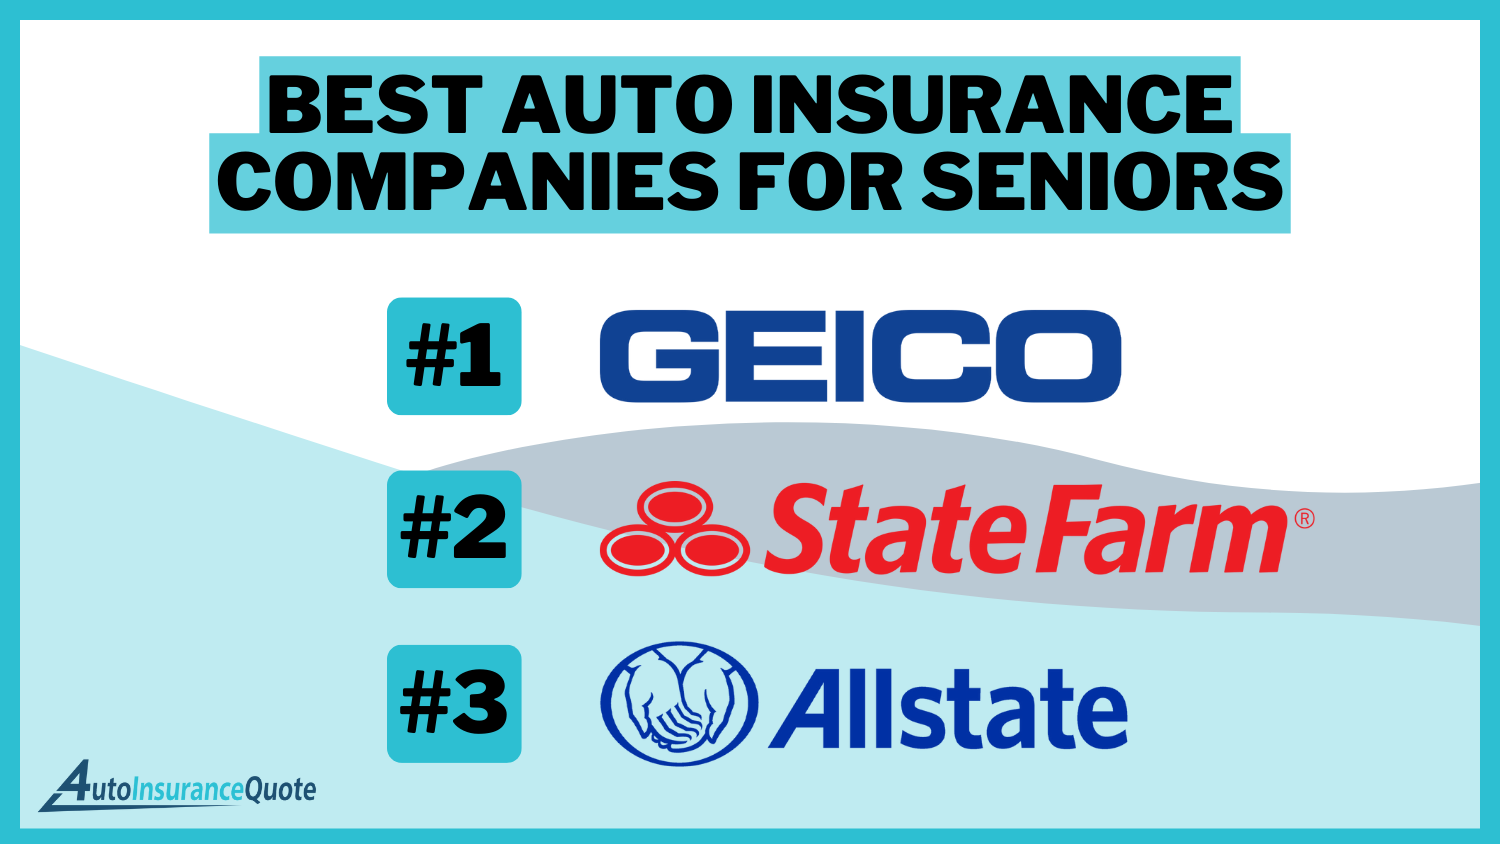 Best Auto Insurance Companies for Seniors: Geico, State Farm, and Allstate.